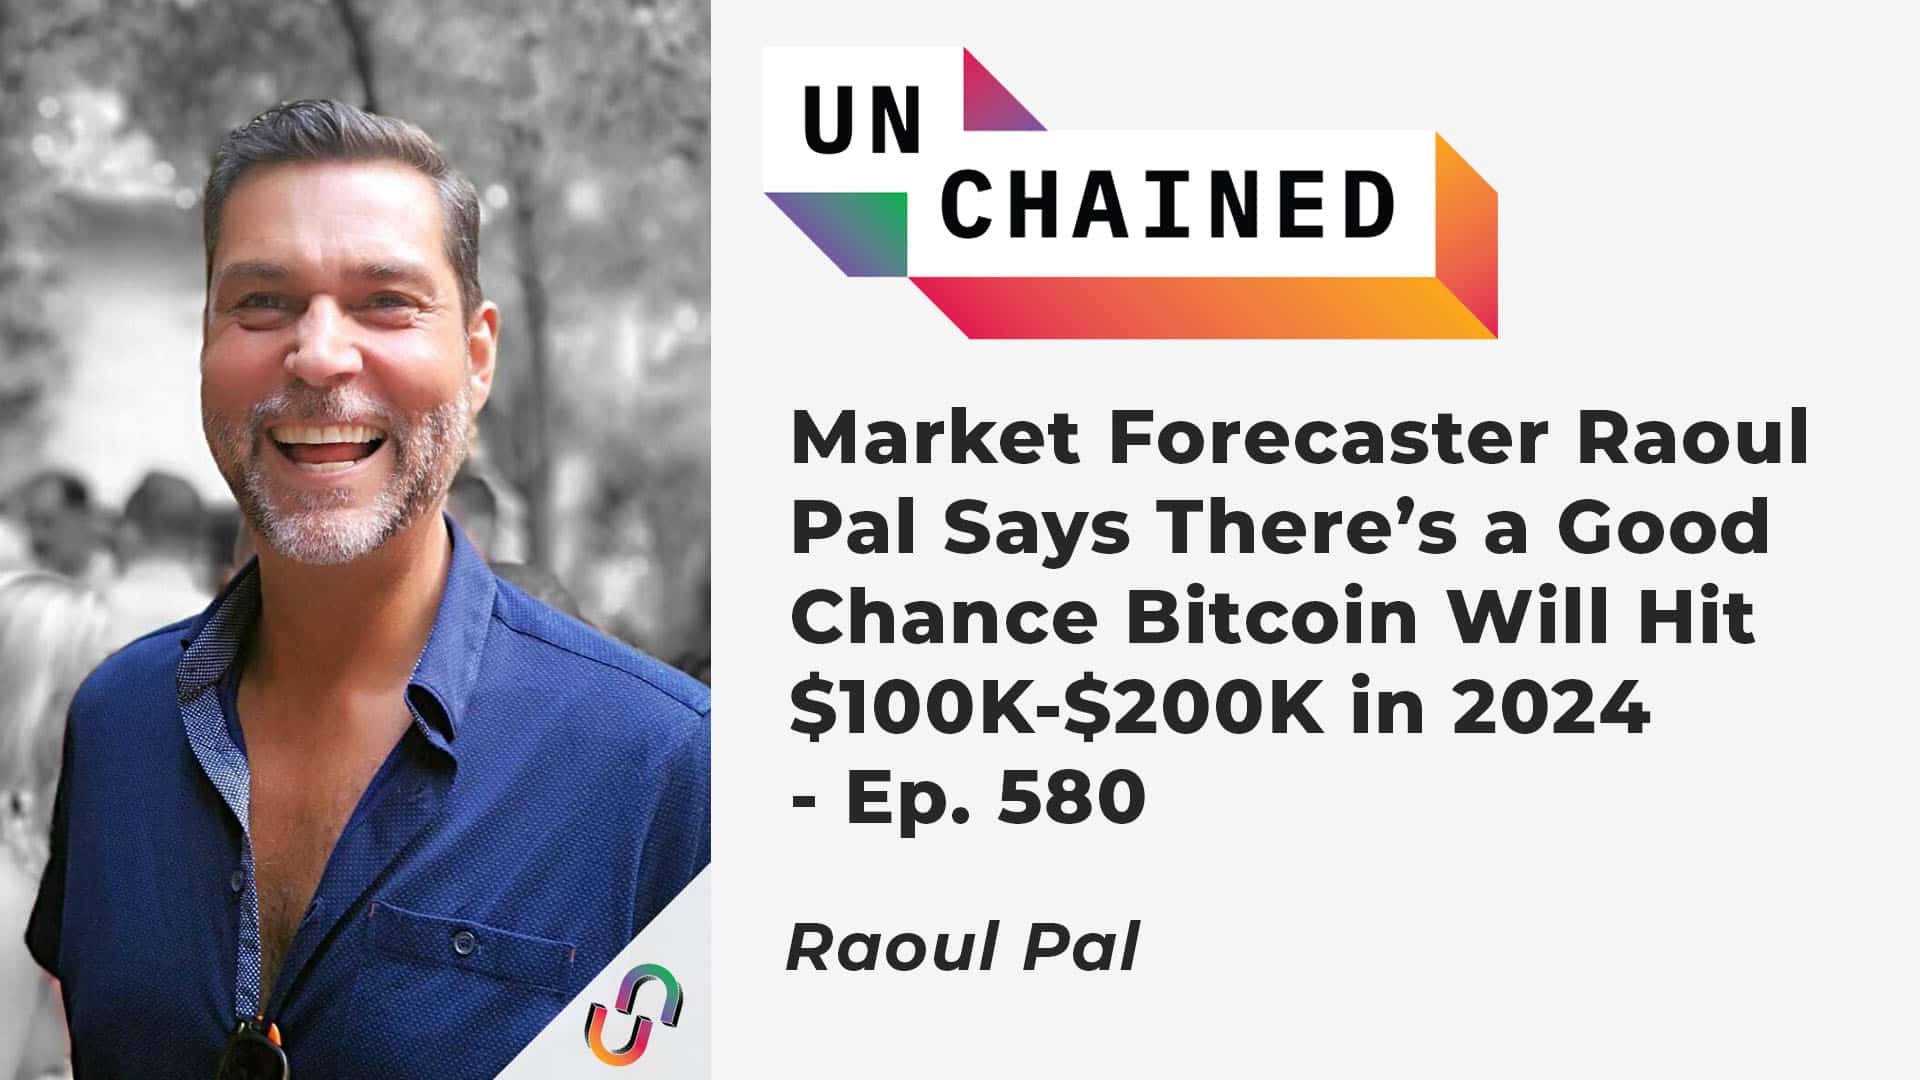 Market Forecaster Raoul Pal Says There’s a Good Chance Bitcoin Will Hit $100K-$200K in 2024 - Ep. 580